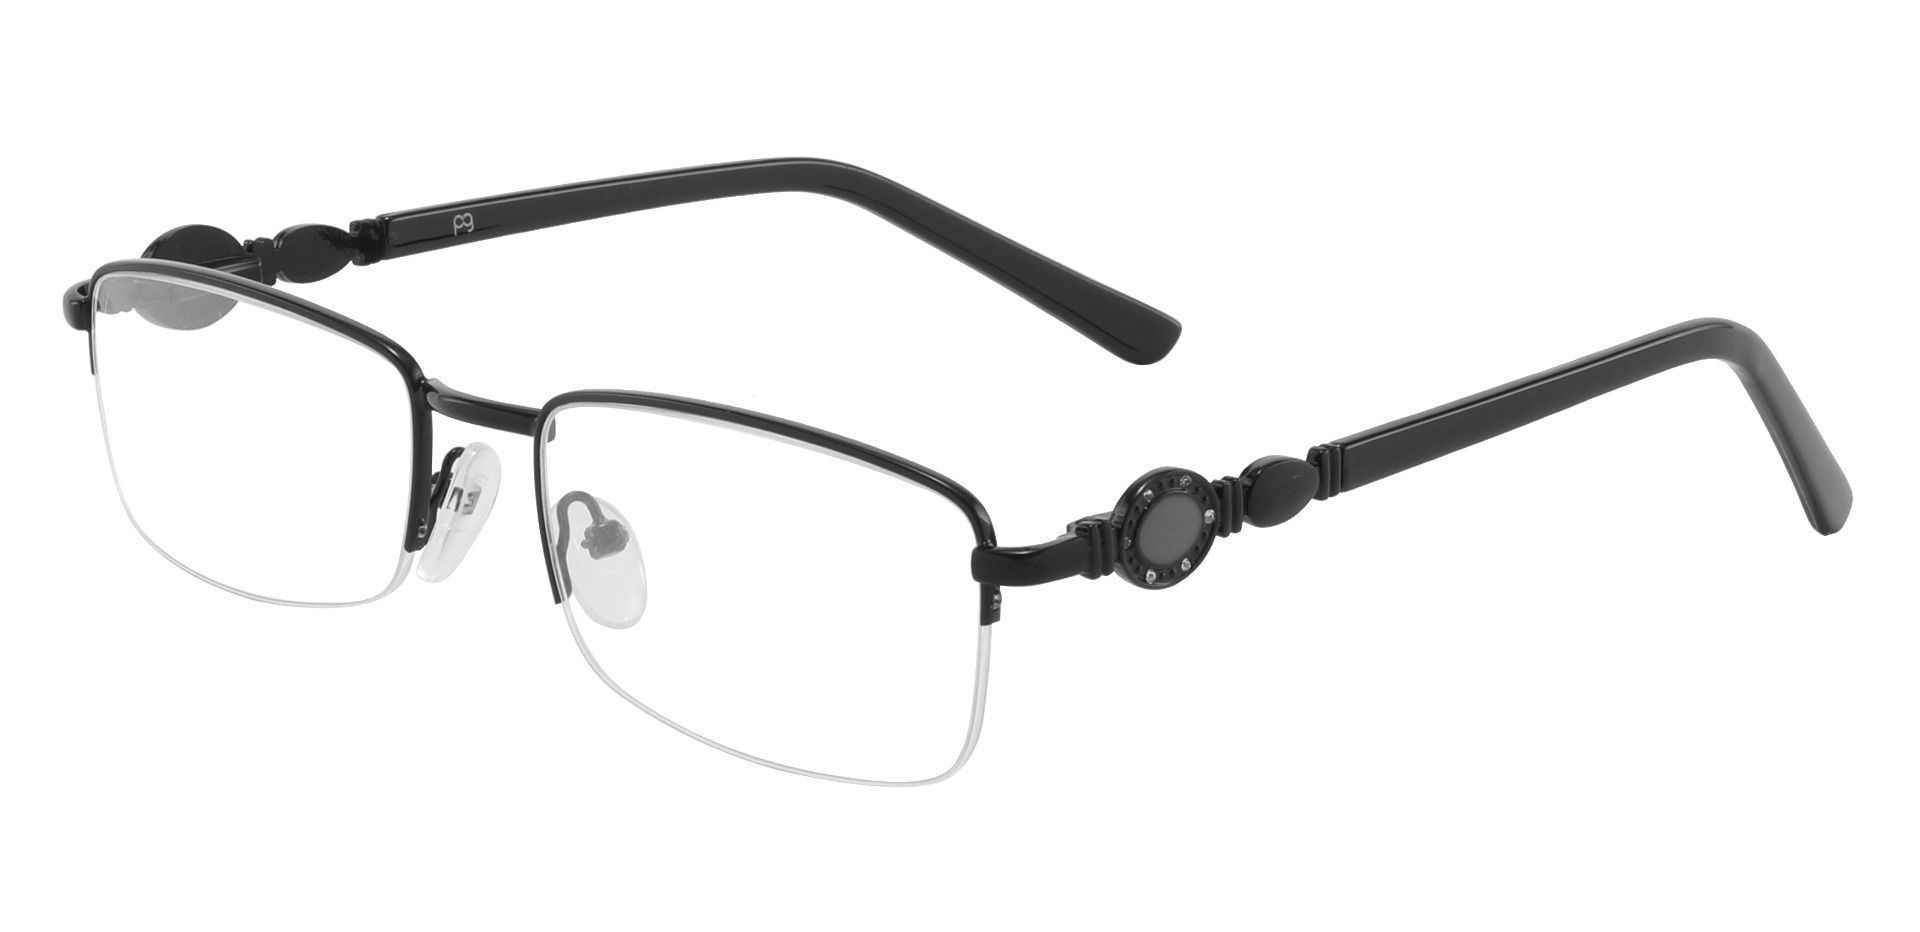 Crowley Rectangle Reading Glasses - Black